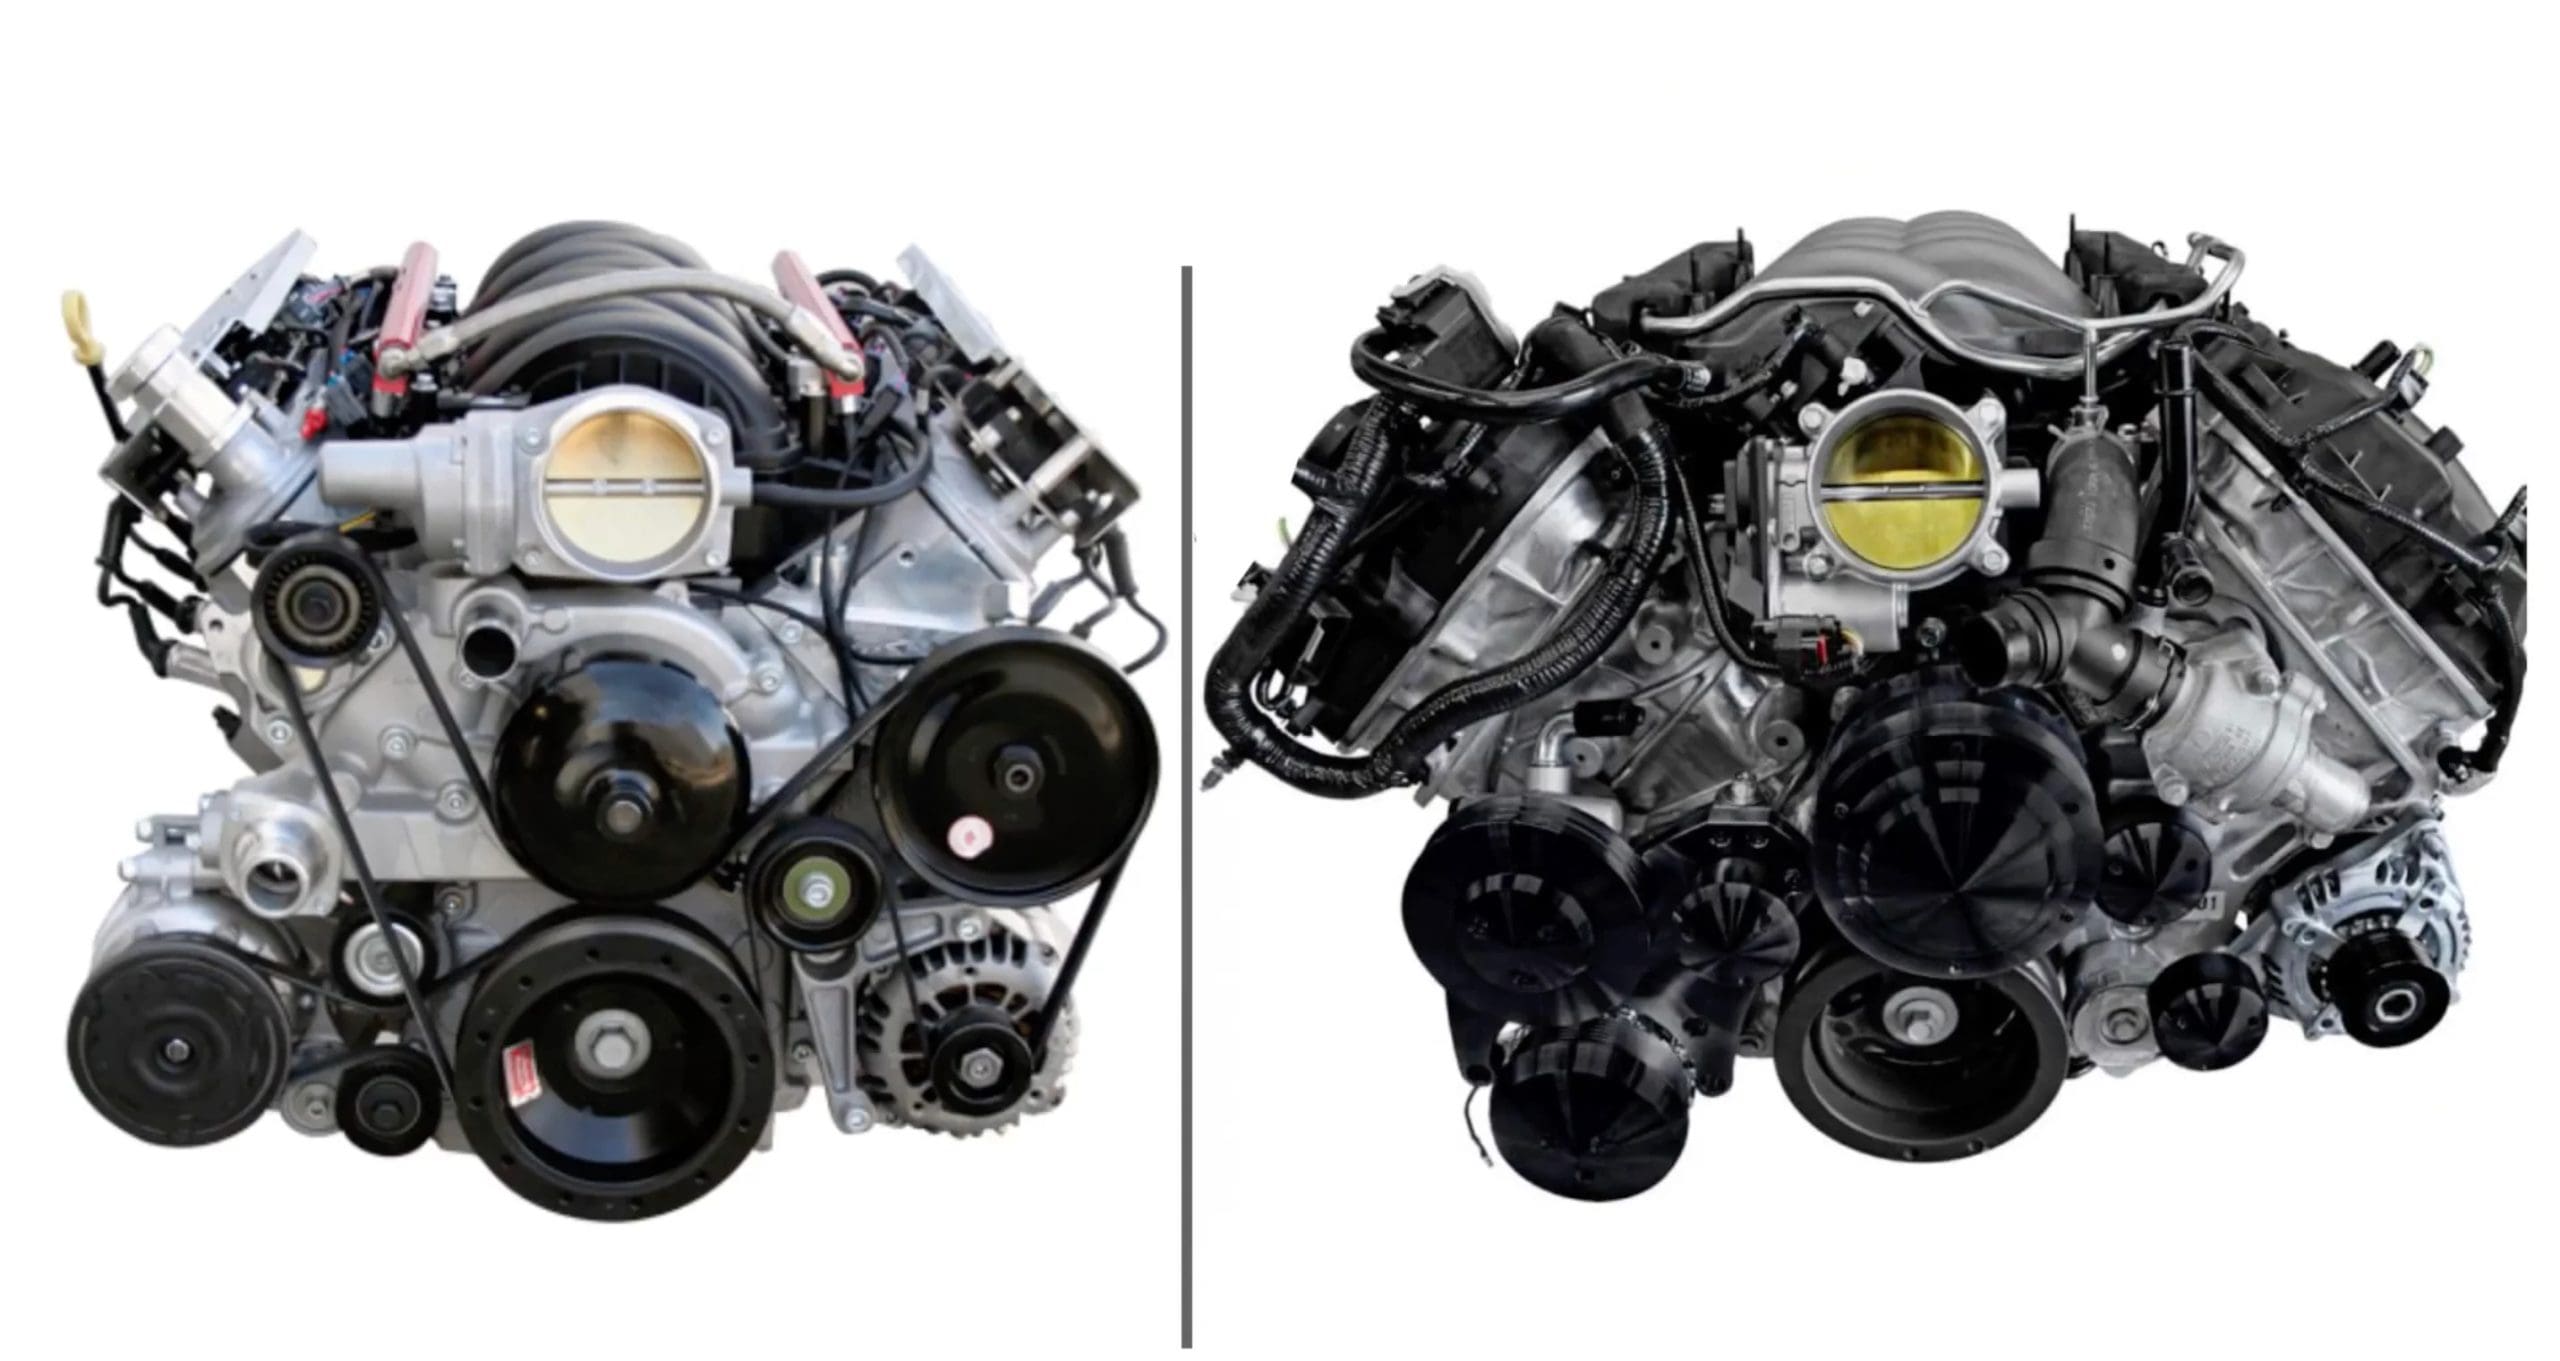 Chevy's LS on the left vs Ford's Coyote engine on the right